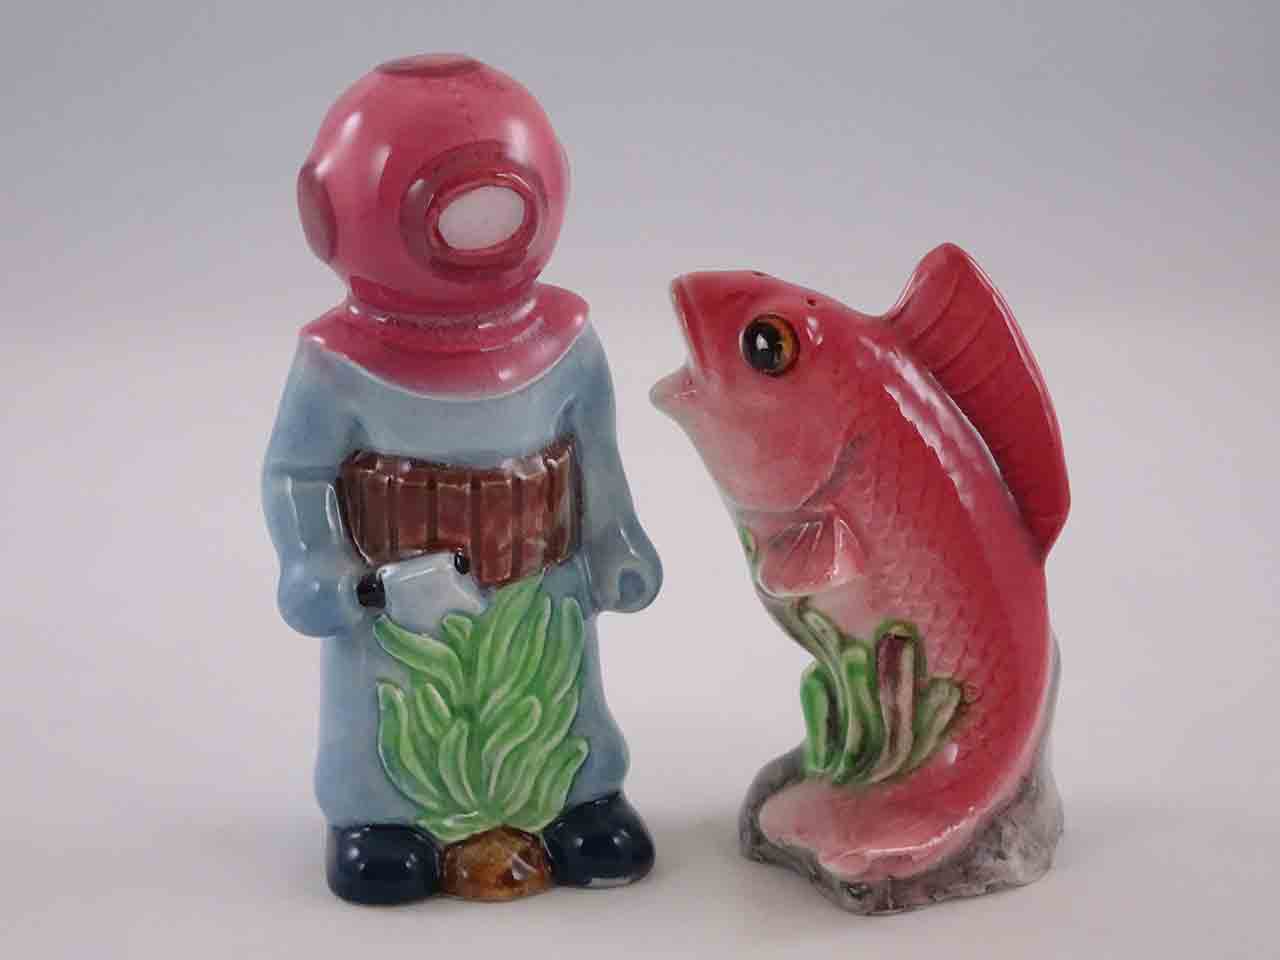 Scuba diver with fish salt and pepper shakers